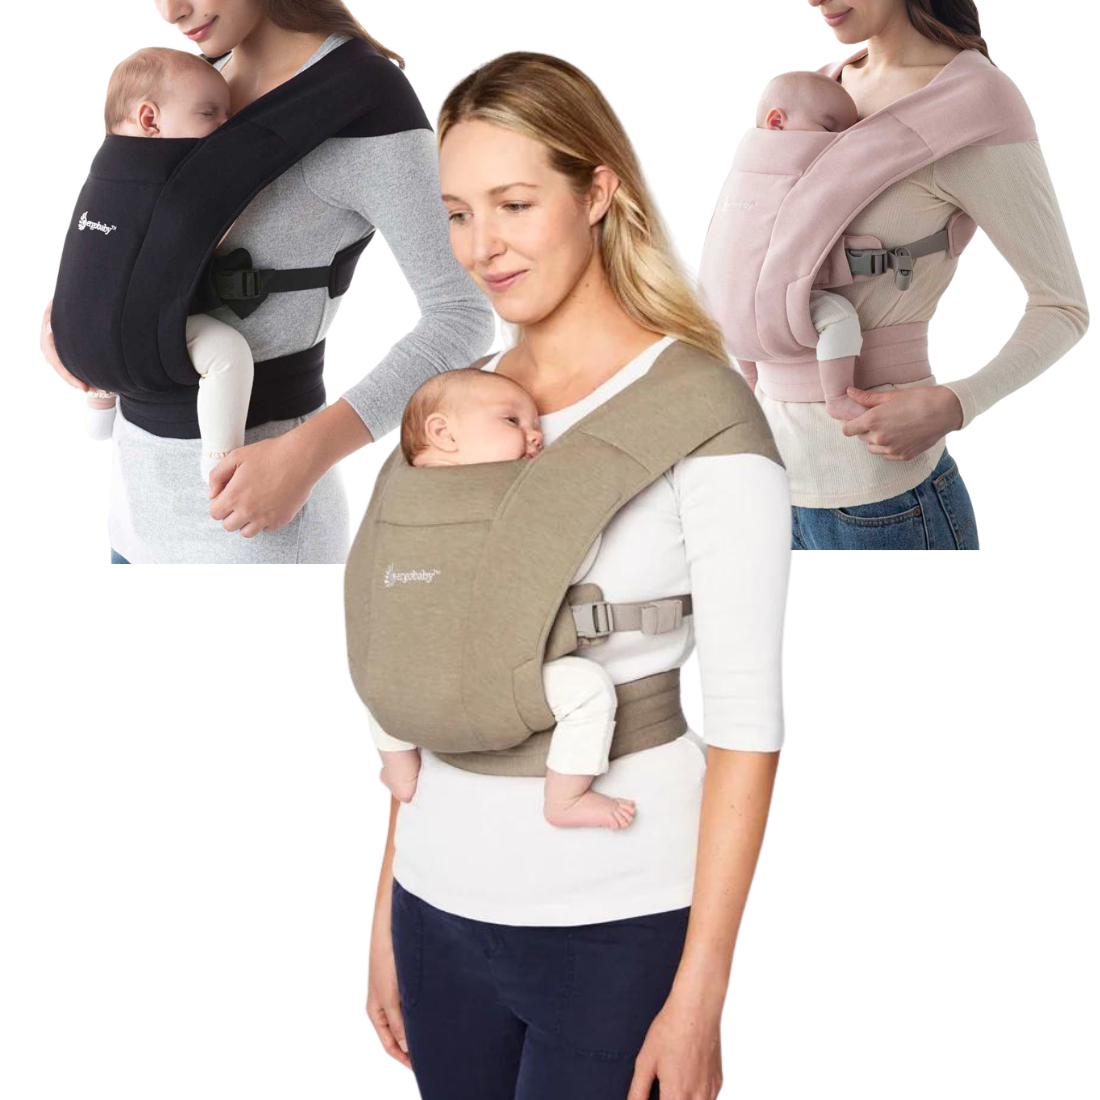 Ergobaby Embrace Carrier